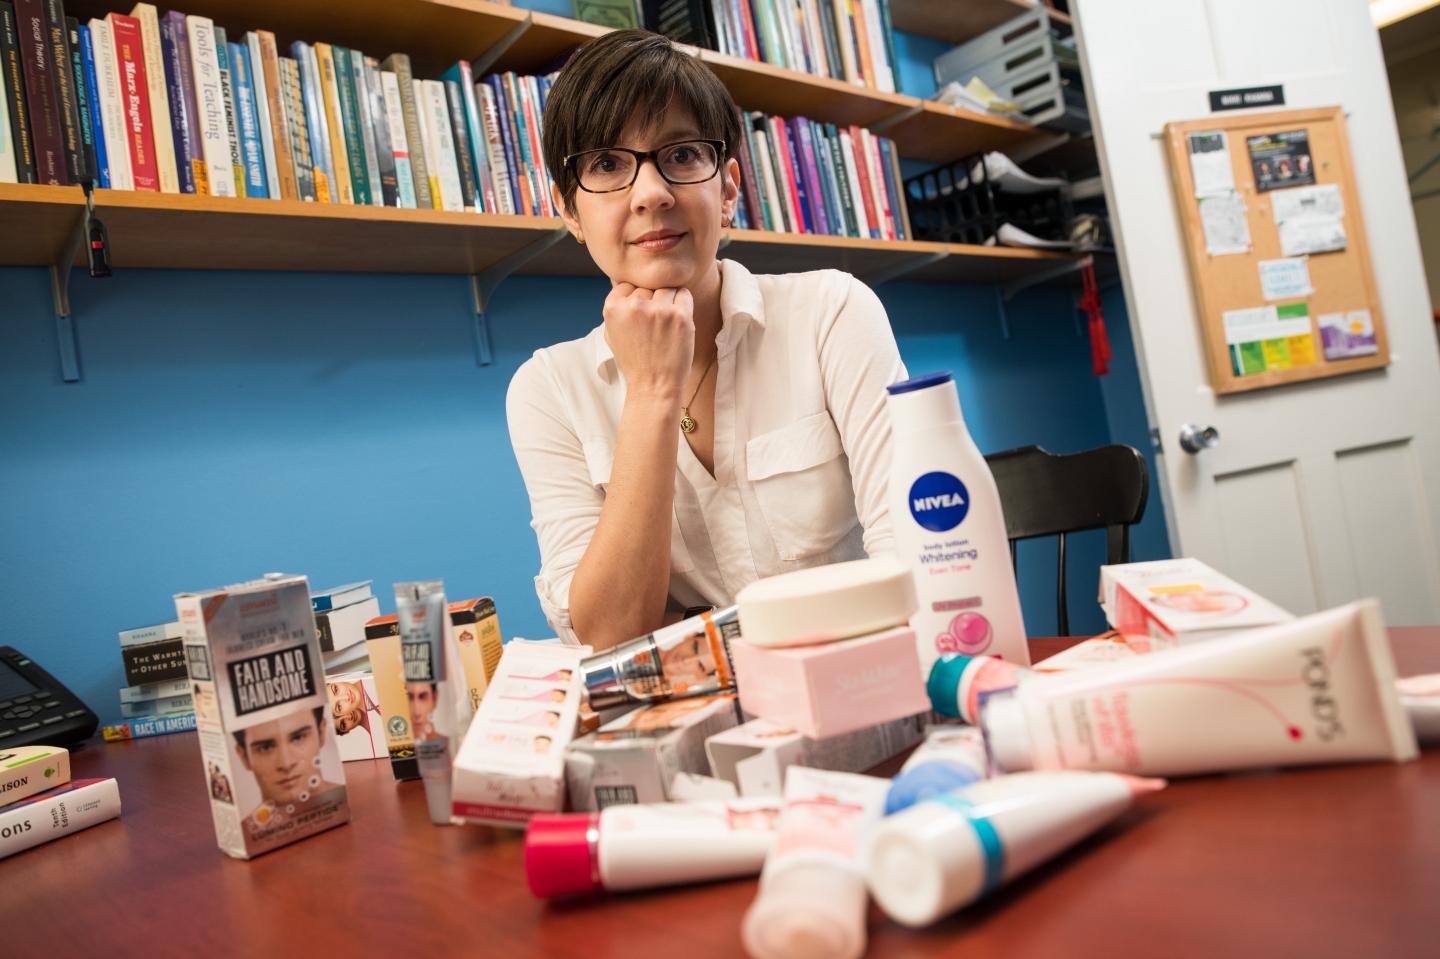 Whitening Creams Are Ubiquitous in Asian and Asian American Culture